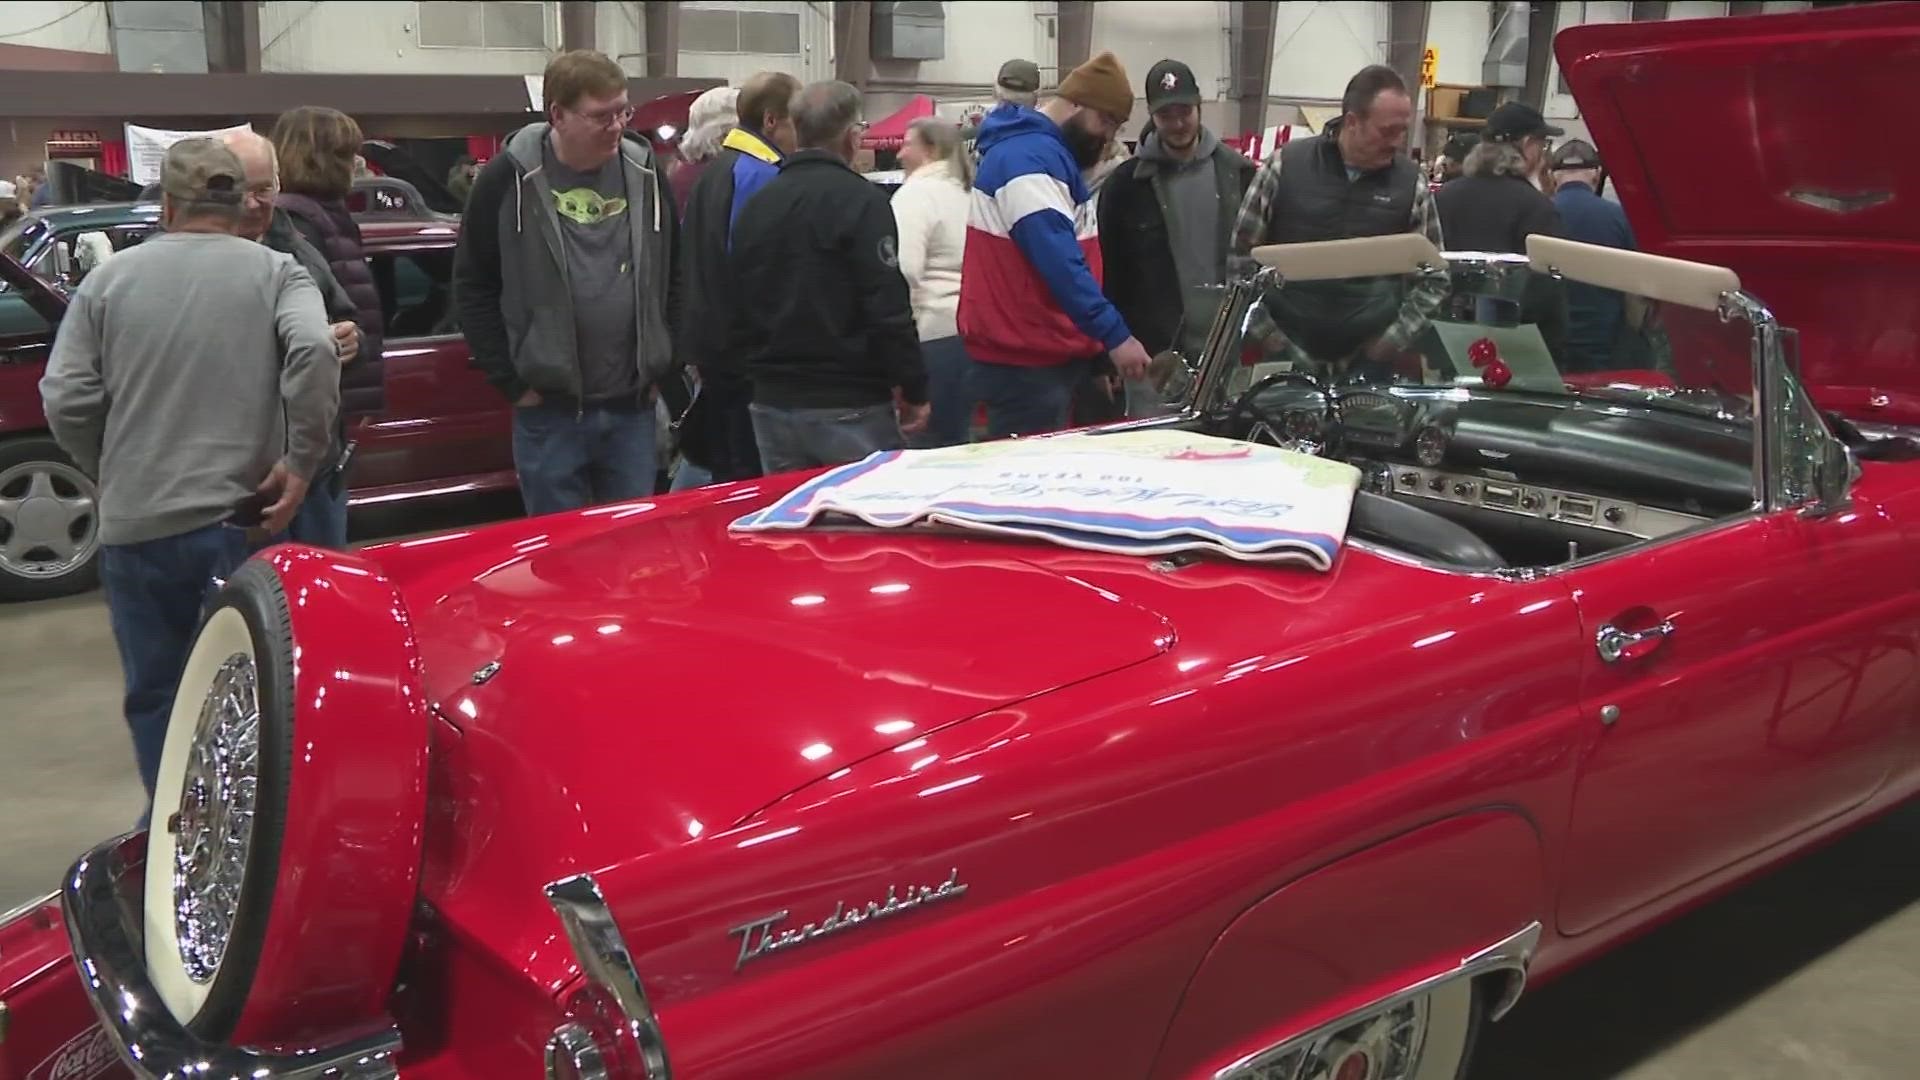 The Cavalcade of Cars at the Hamburg Fairgrounds  features motorcycles, hot rods, and of course, classic cars, plus live music and vendors.